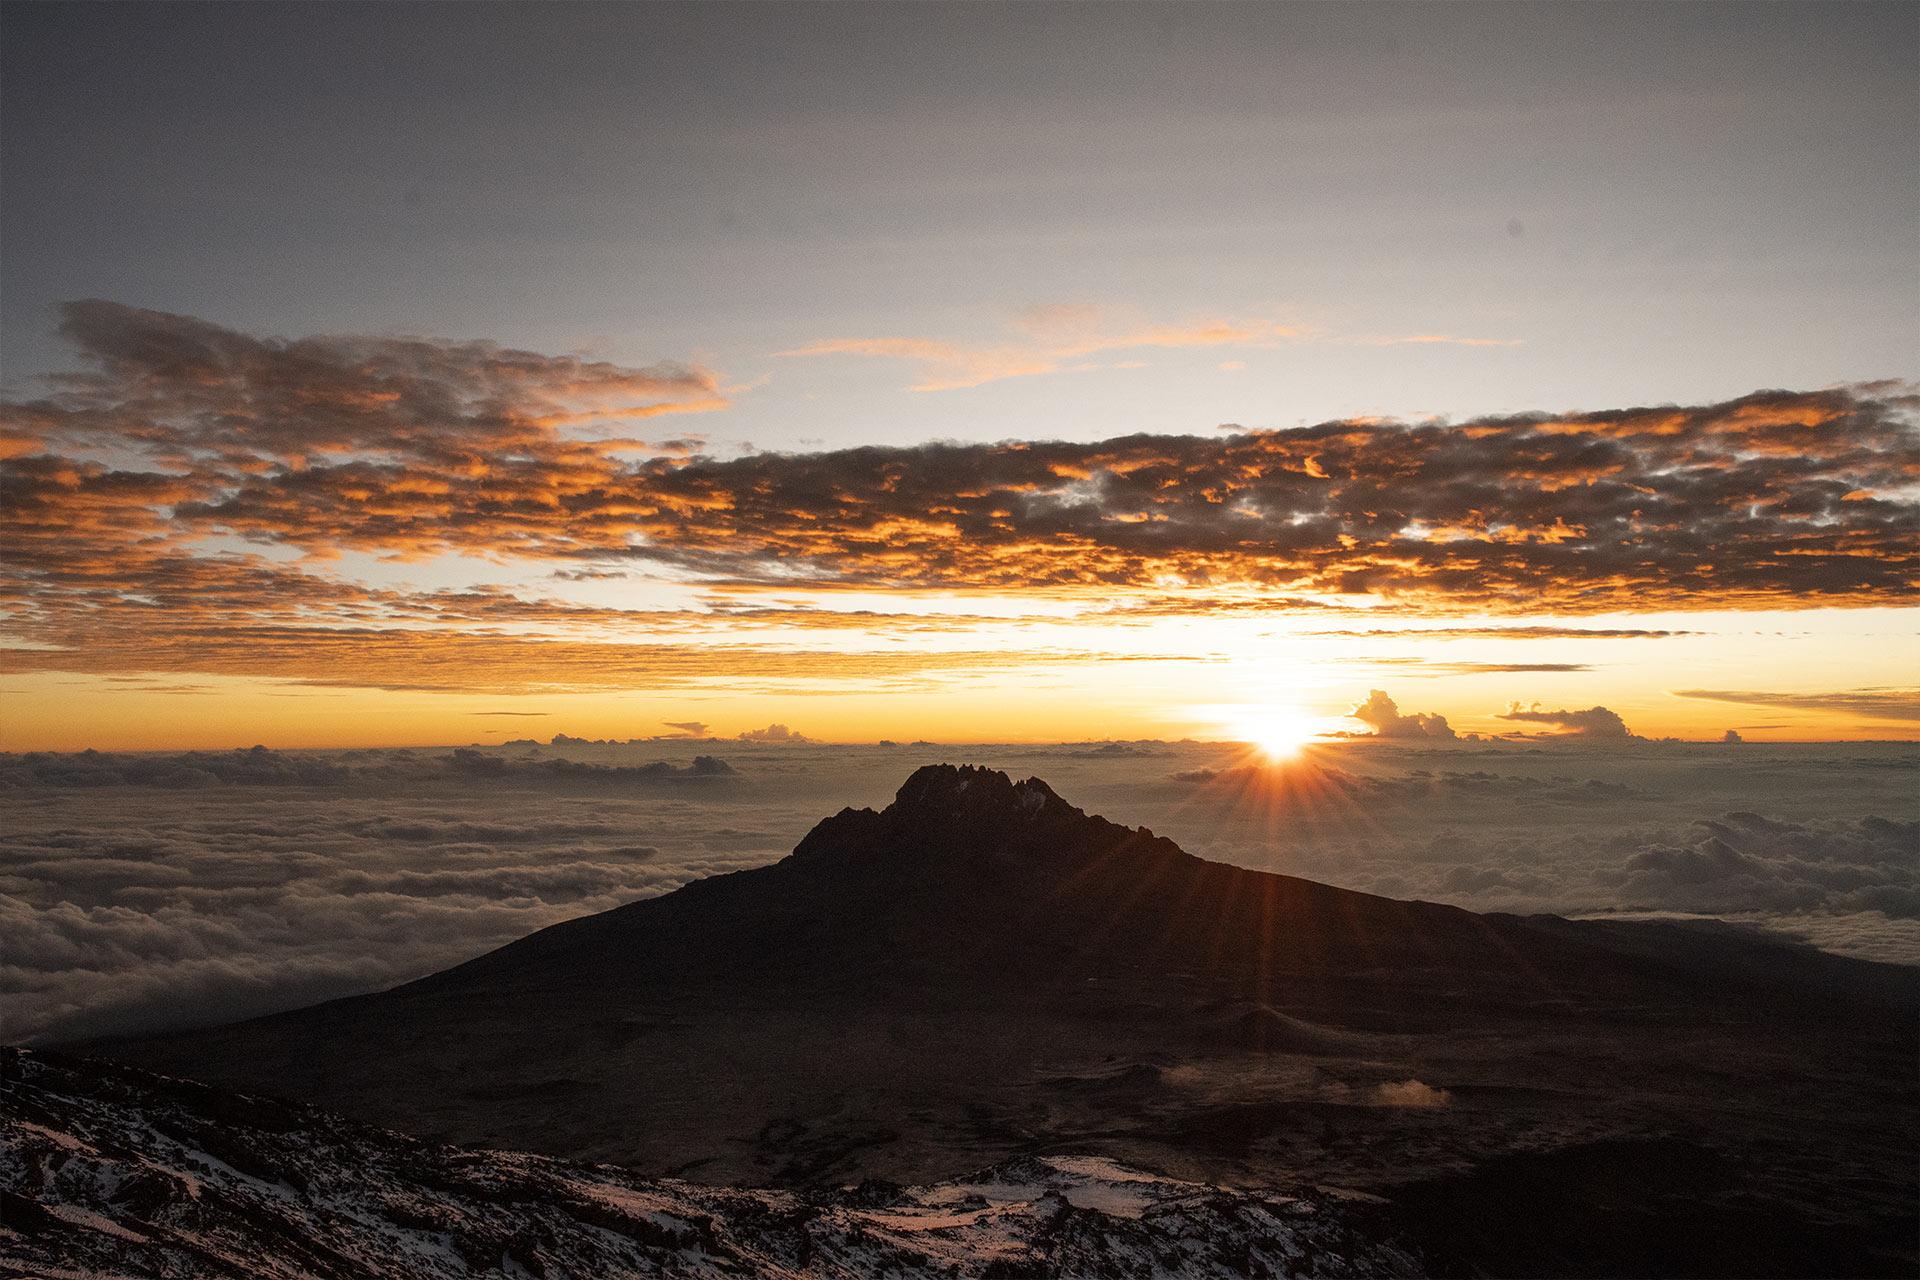 There are seven established routes on Kilimanjaro. The more remote the route the better your journey and experience during the climb